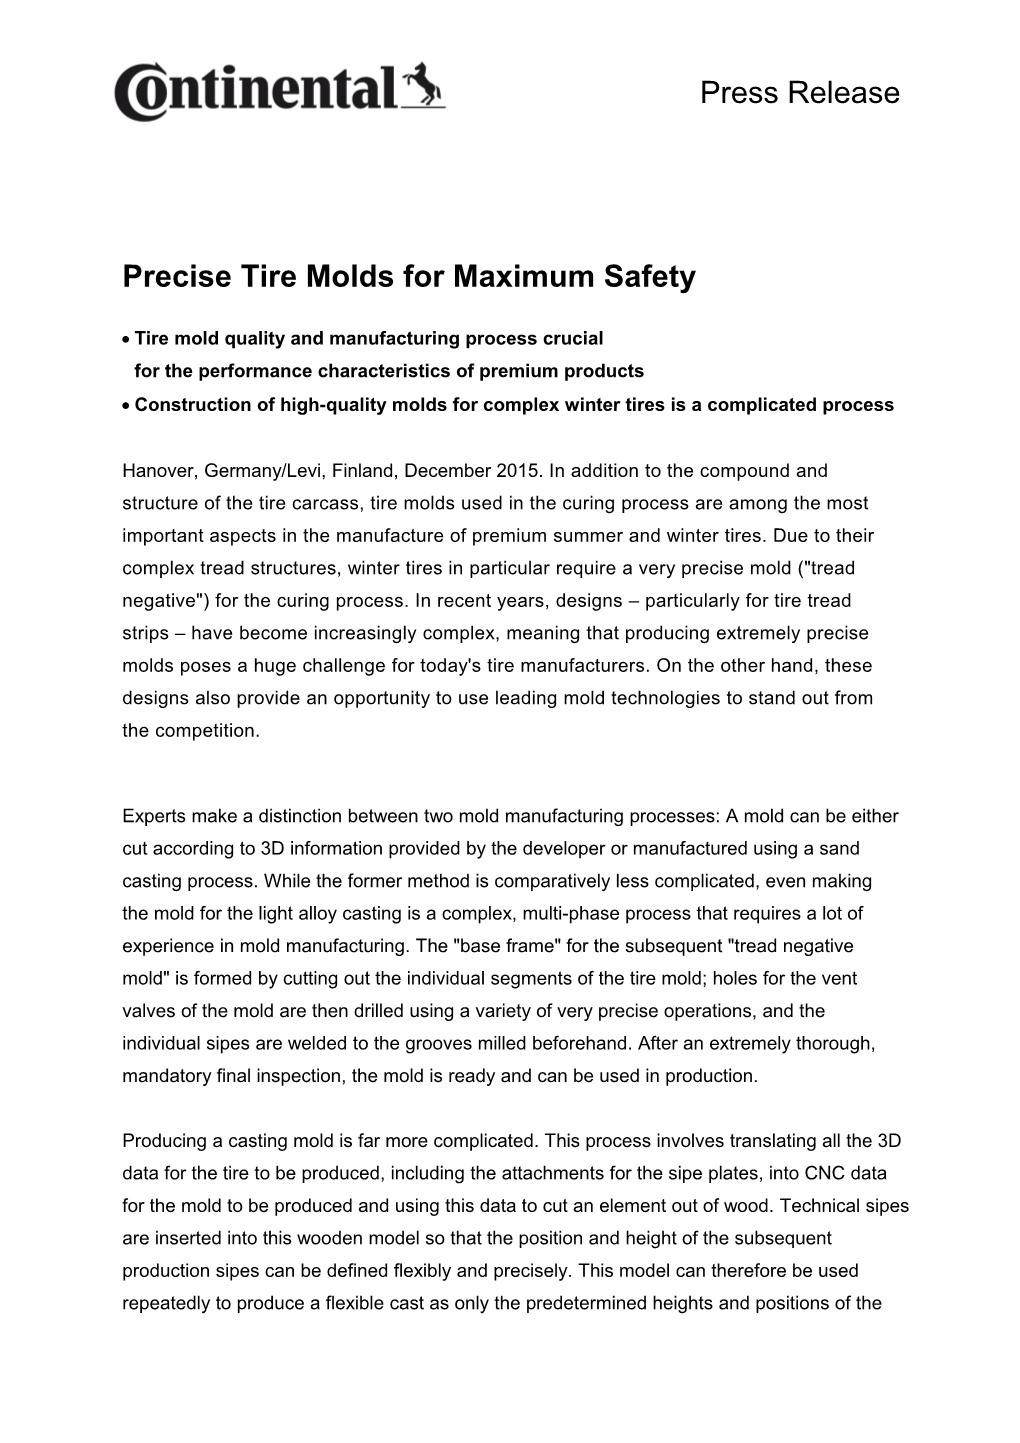 Precise Tire Molds for Maximum Safety